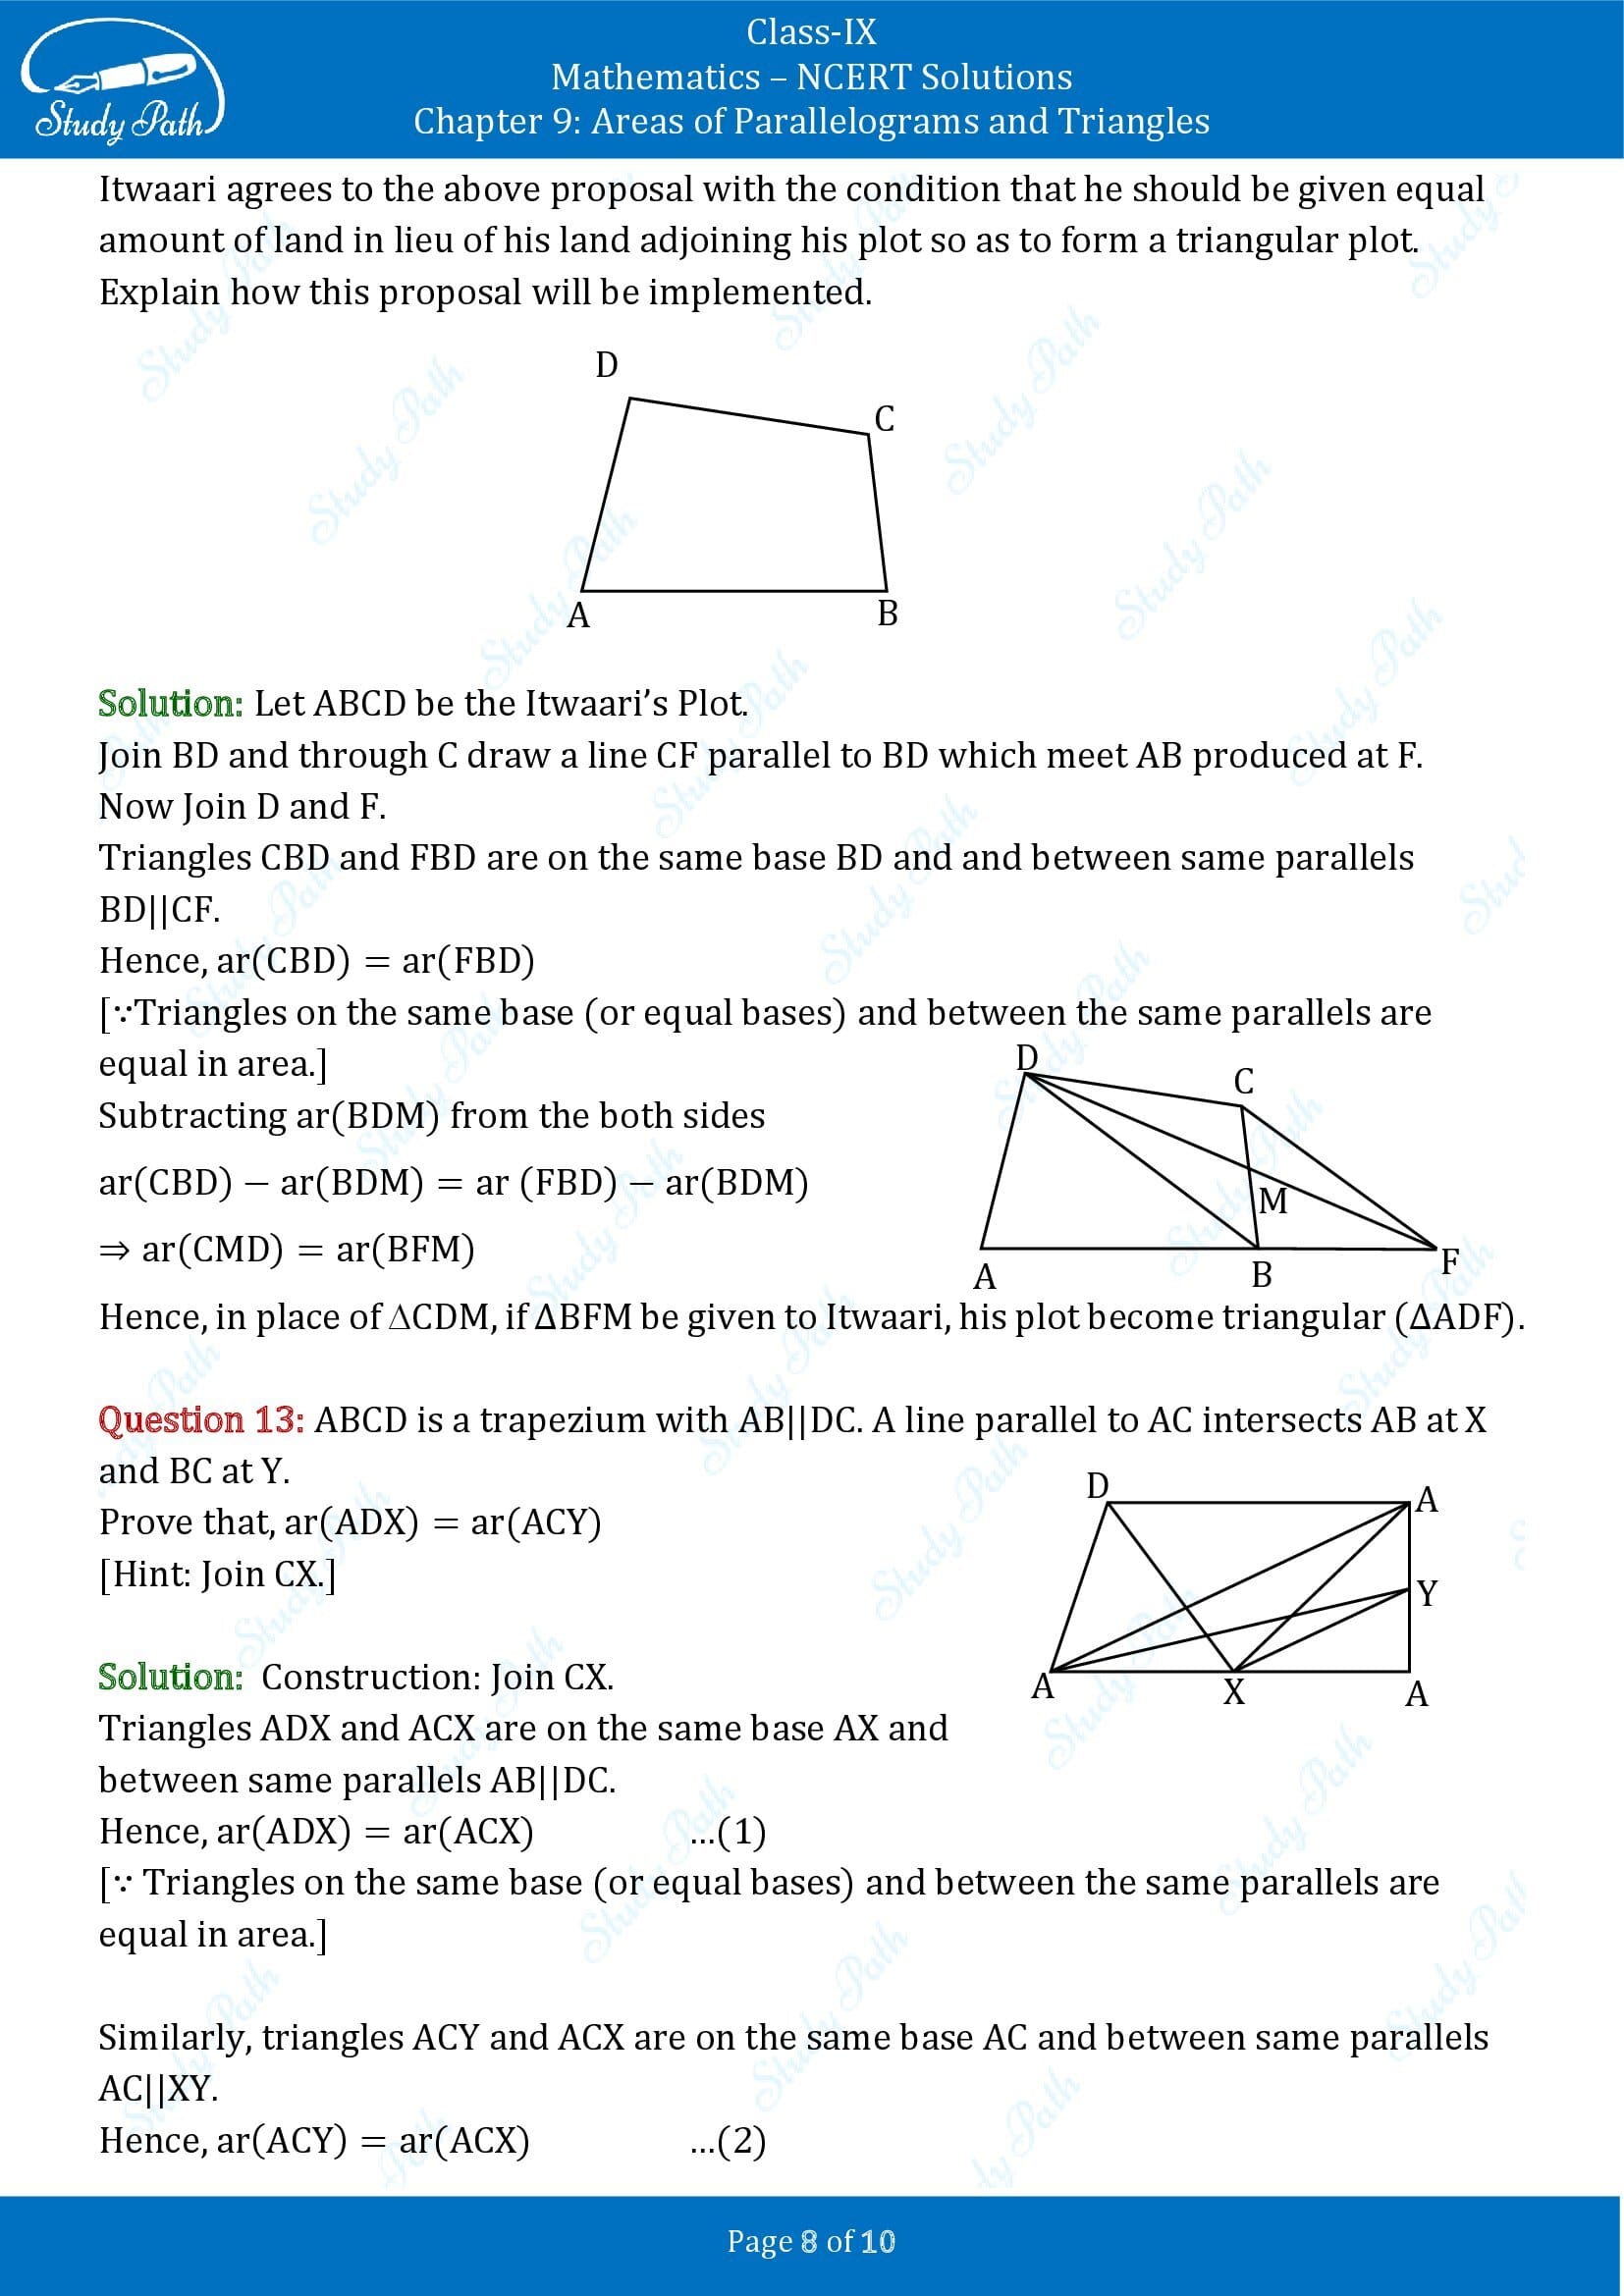 NCERT Solutions for Class 9 Maths Chapter 9 Areas of Parallelograms and Triangles Exercise 9.3 00008